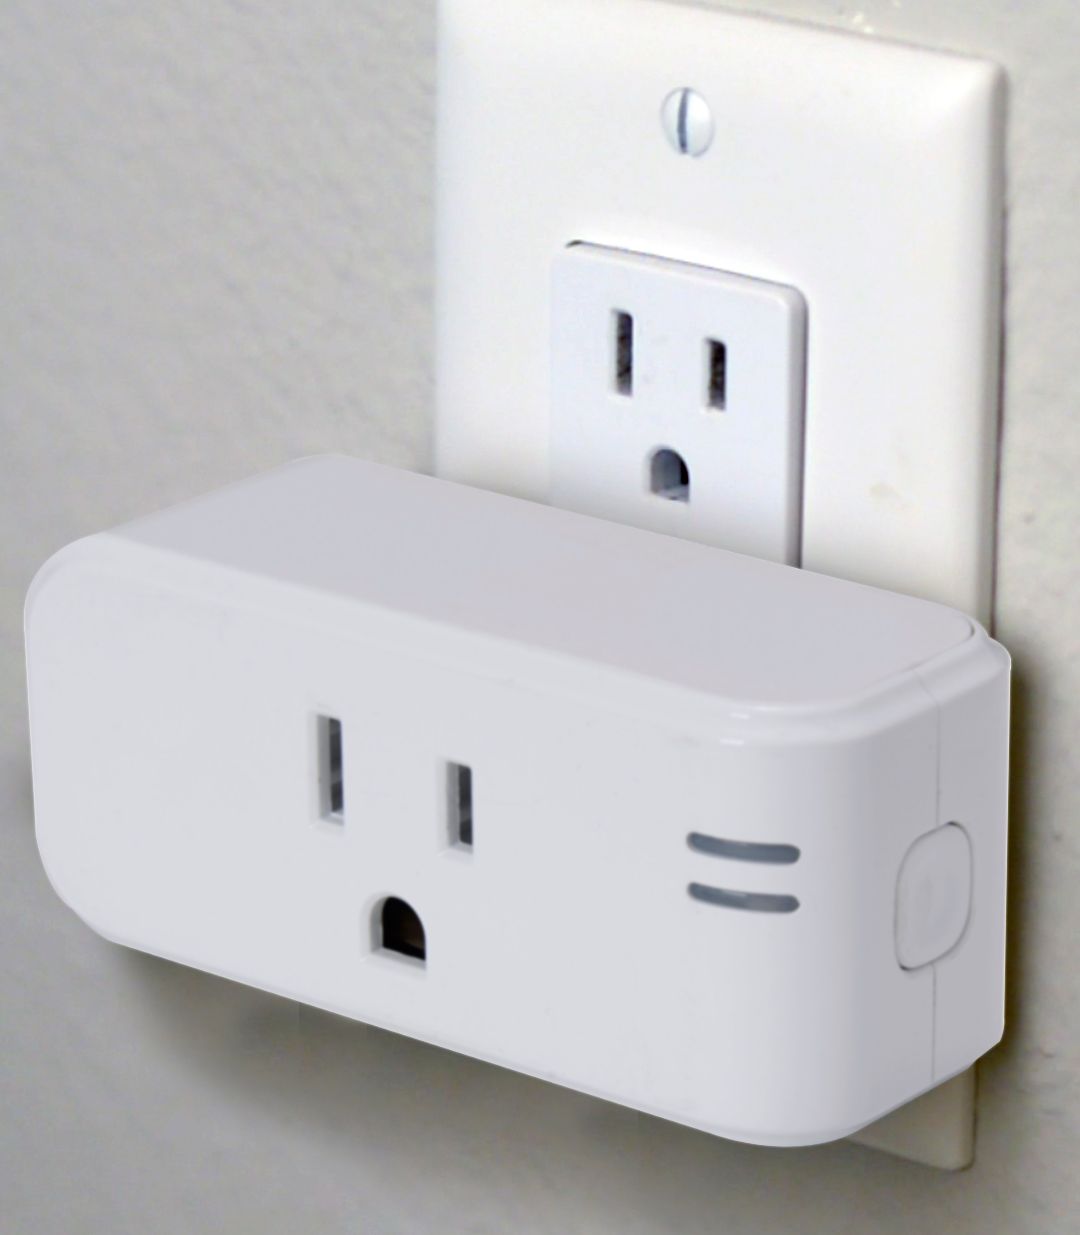 WLPP1 Smart Home Plug, Two-Pack, White, 2 Count – E Z Home Systems